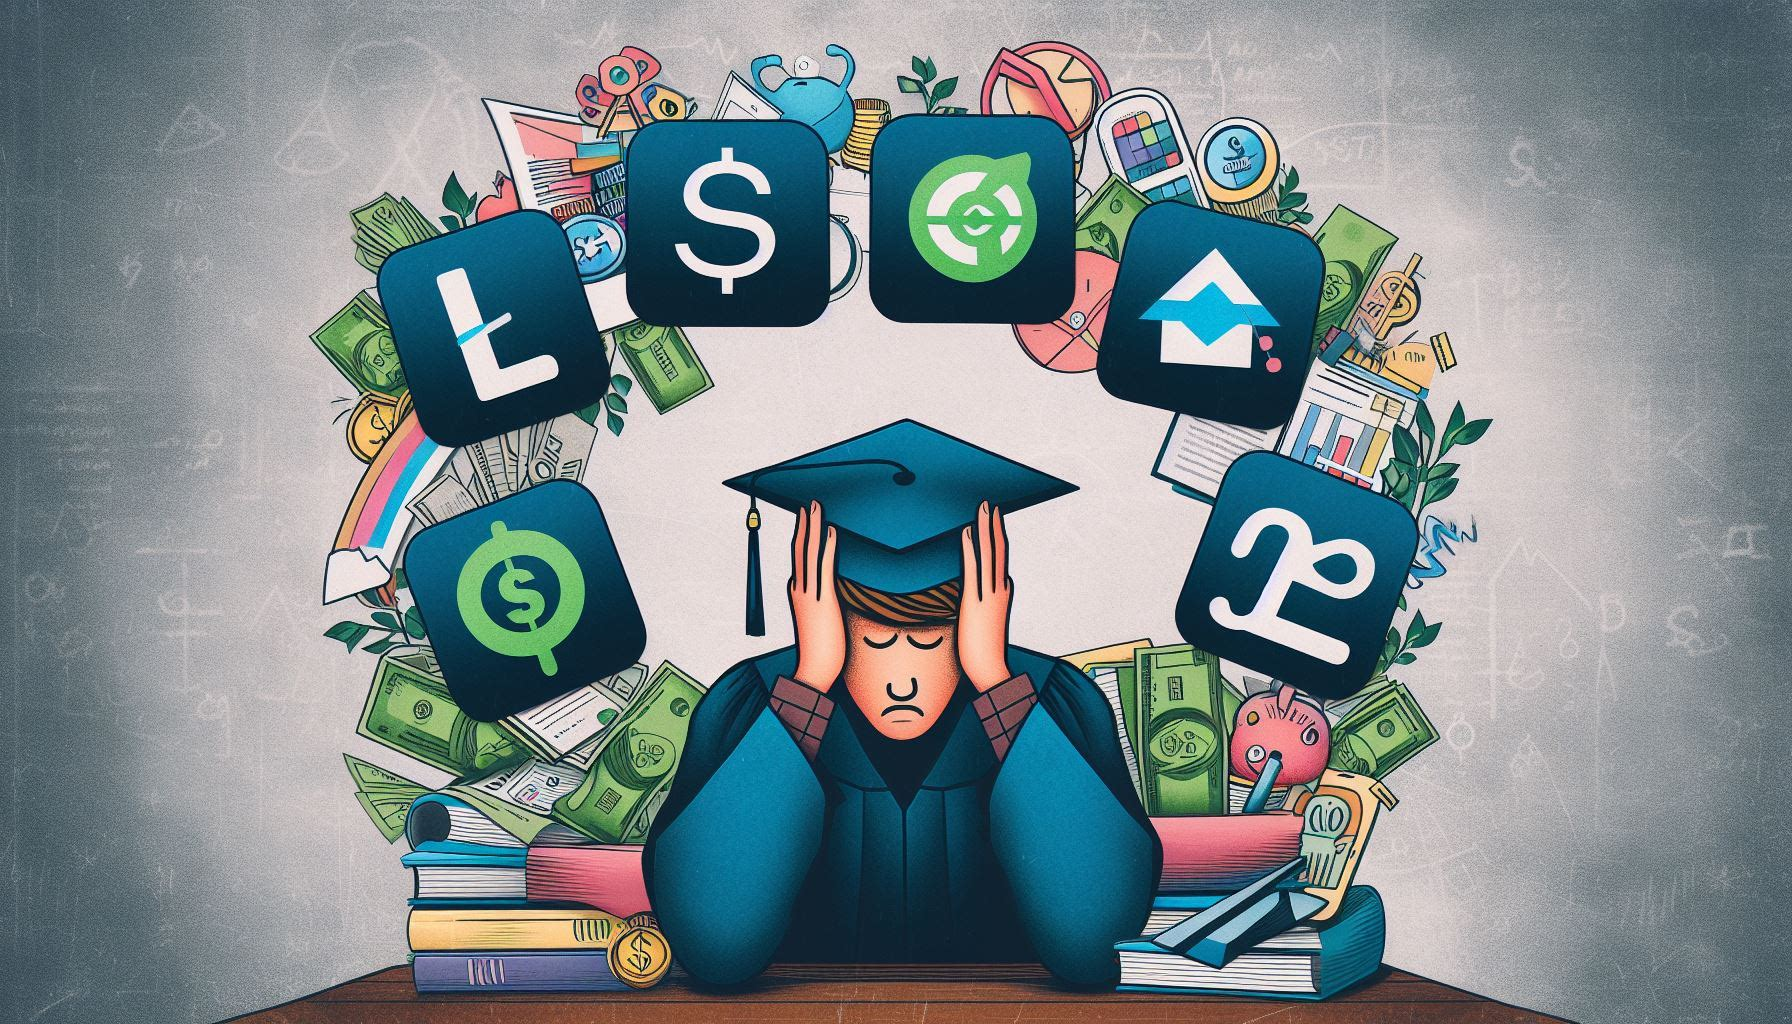 best budgeting apps for students